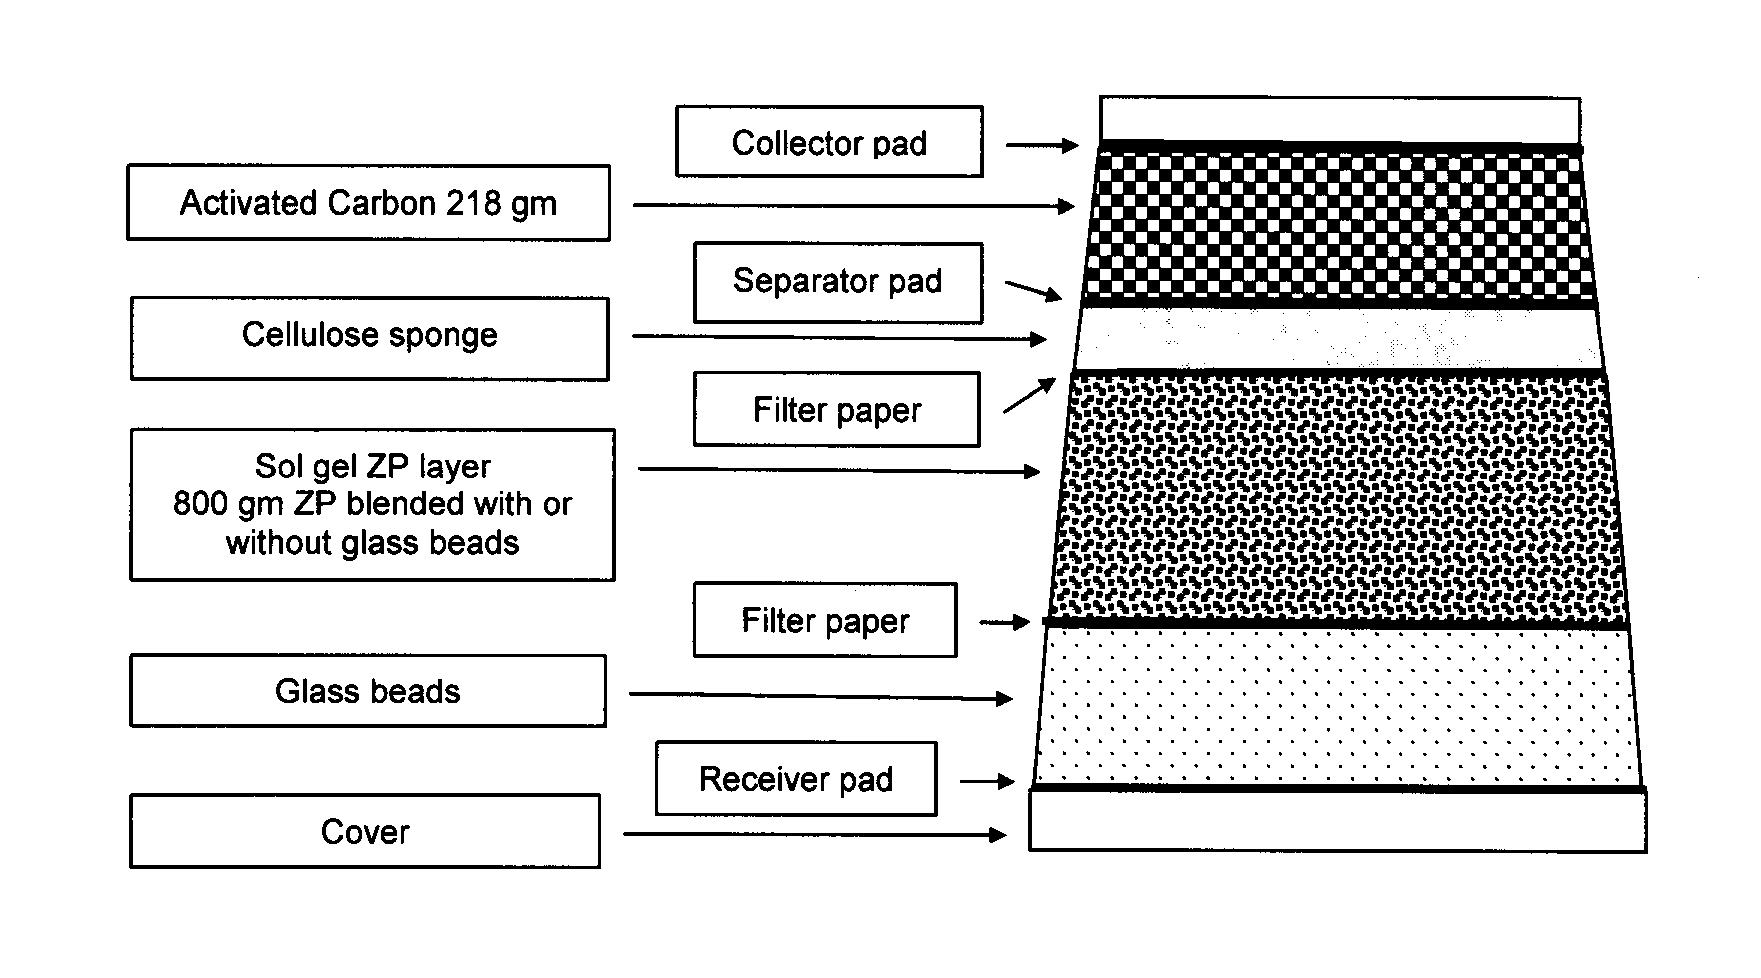 Zirconium Phosphate Particles Having Improved Adsorption Capacity and Method Of Synthesizing The Same